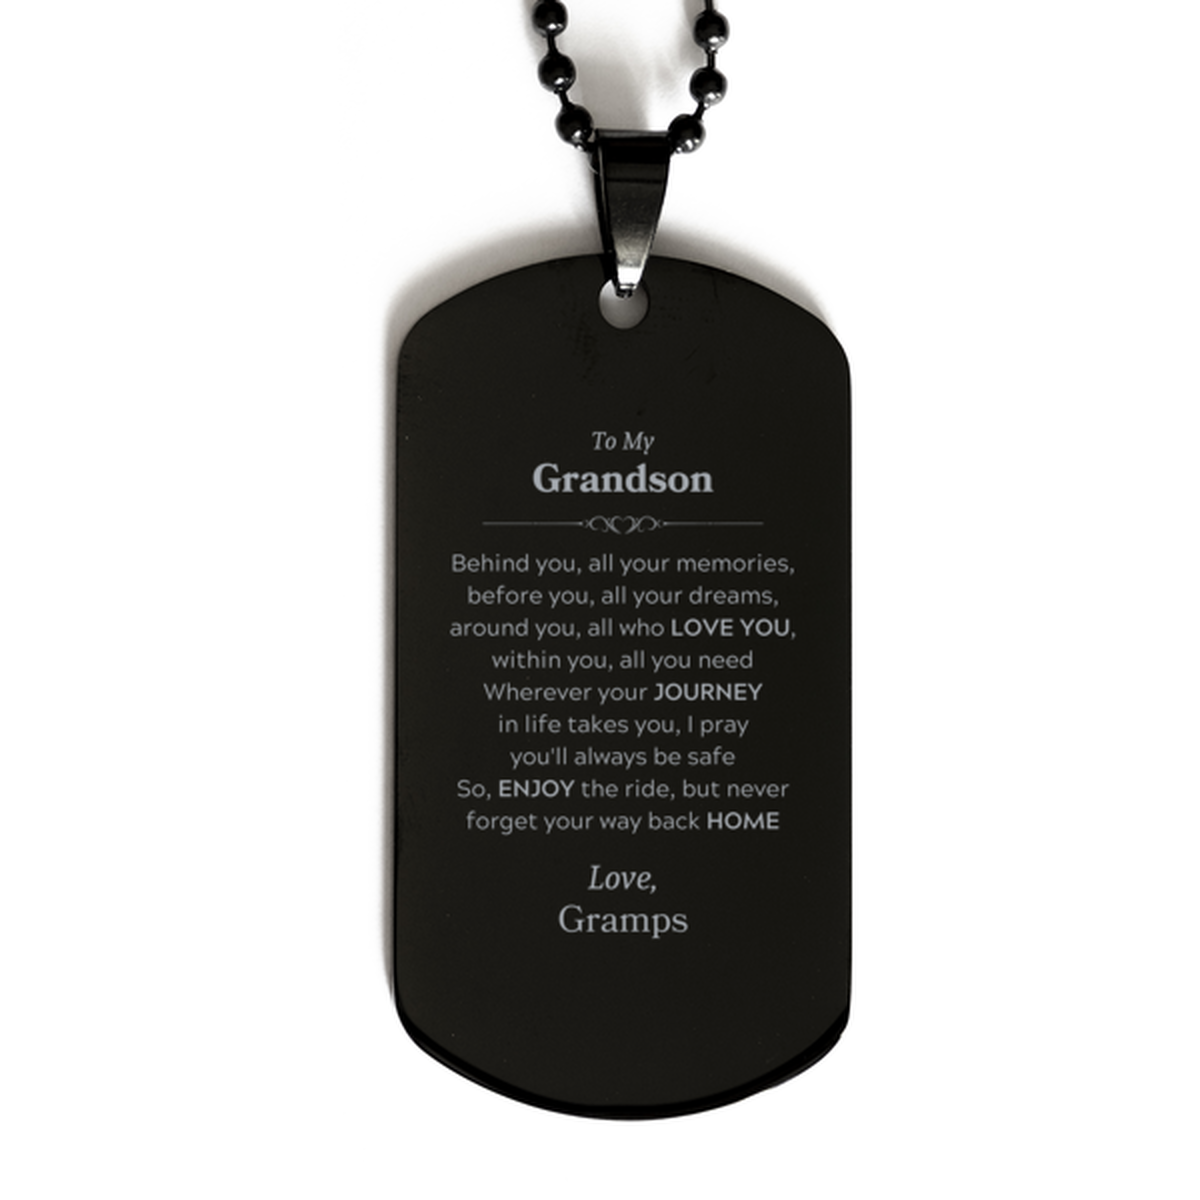 To My Grandson Graduation Gifts from Gramps, Grandson Black Dog Tag Christmas Birthday Gifts for Grandson Behind you, all your memories, before you, all your dreams. Love, Gramps